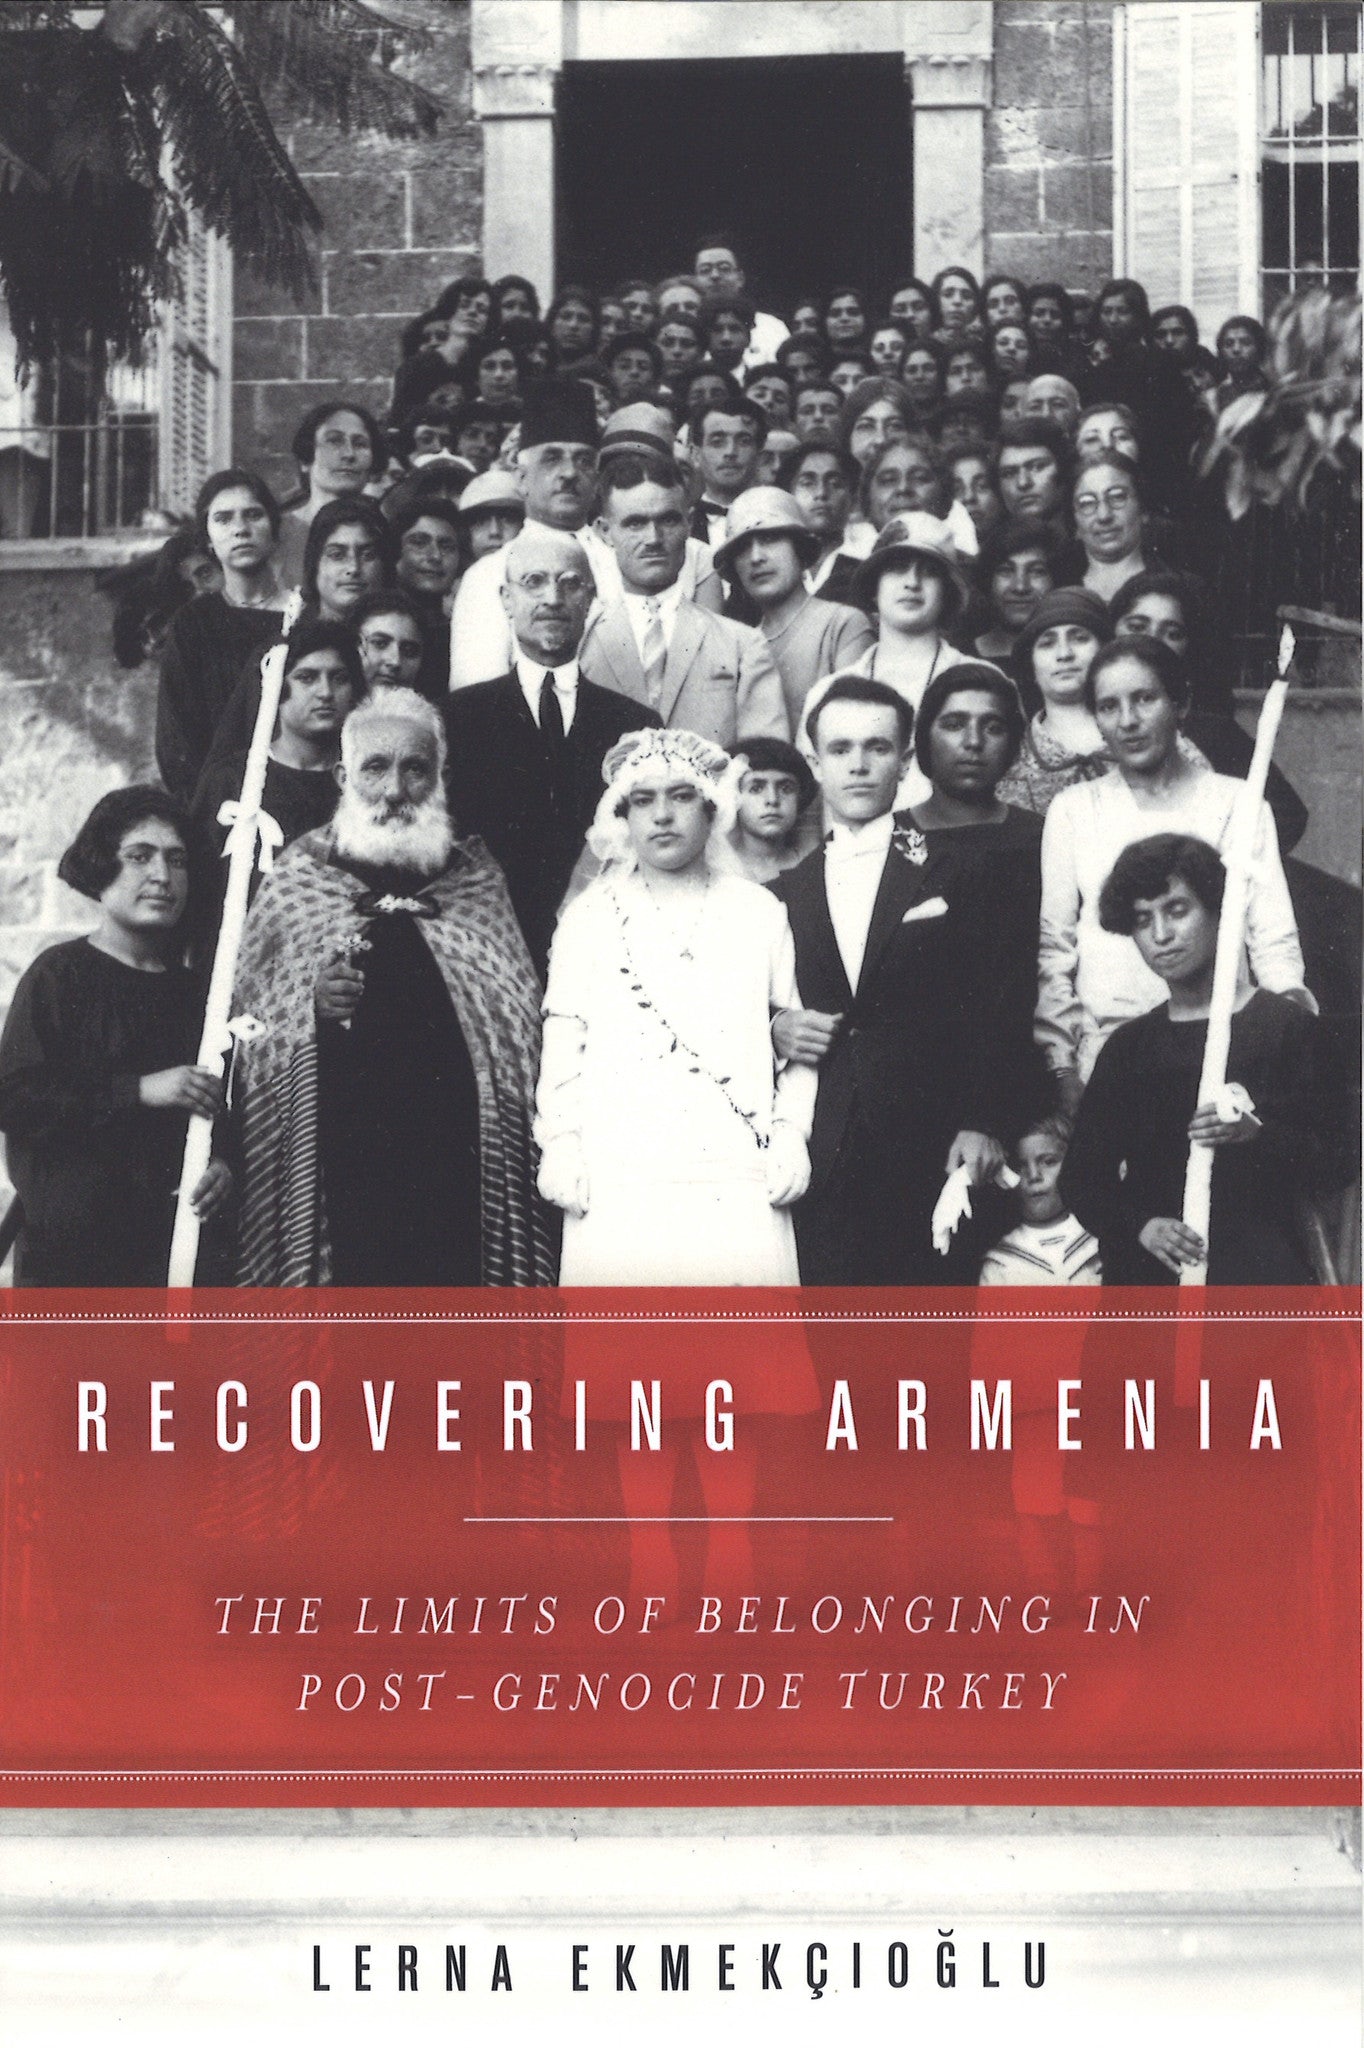 RECOVERING ARMENIA: The Limits of Belonging in Post-Genocide Turkey